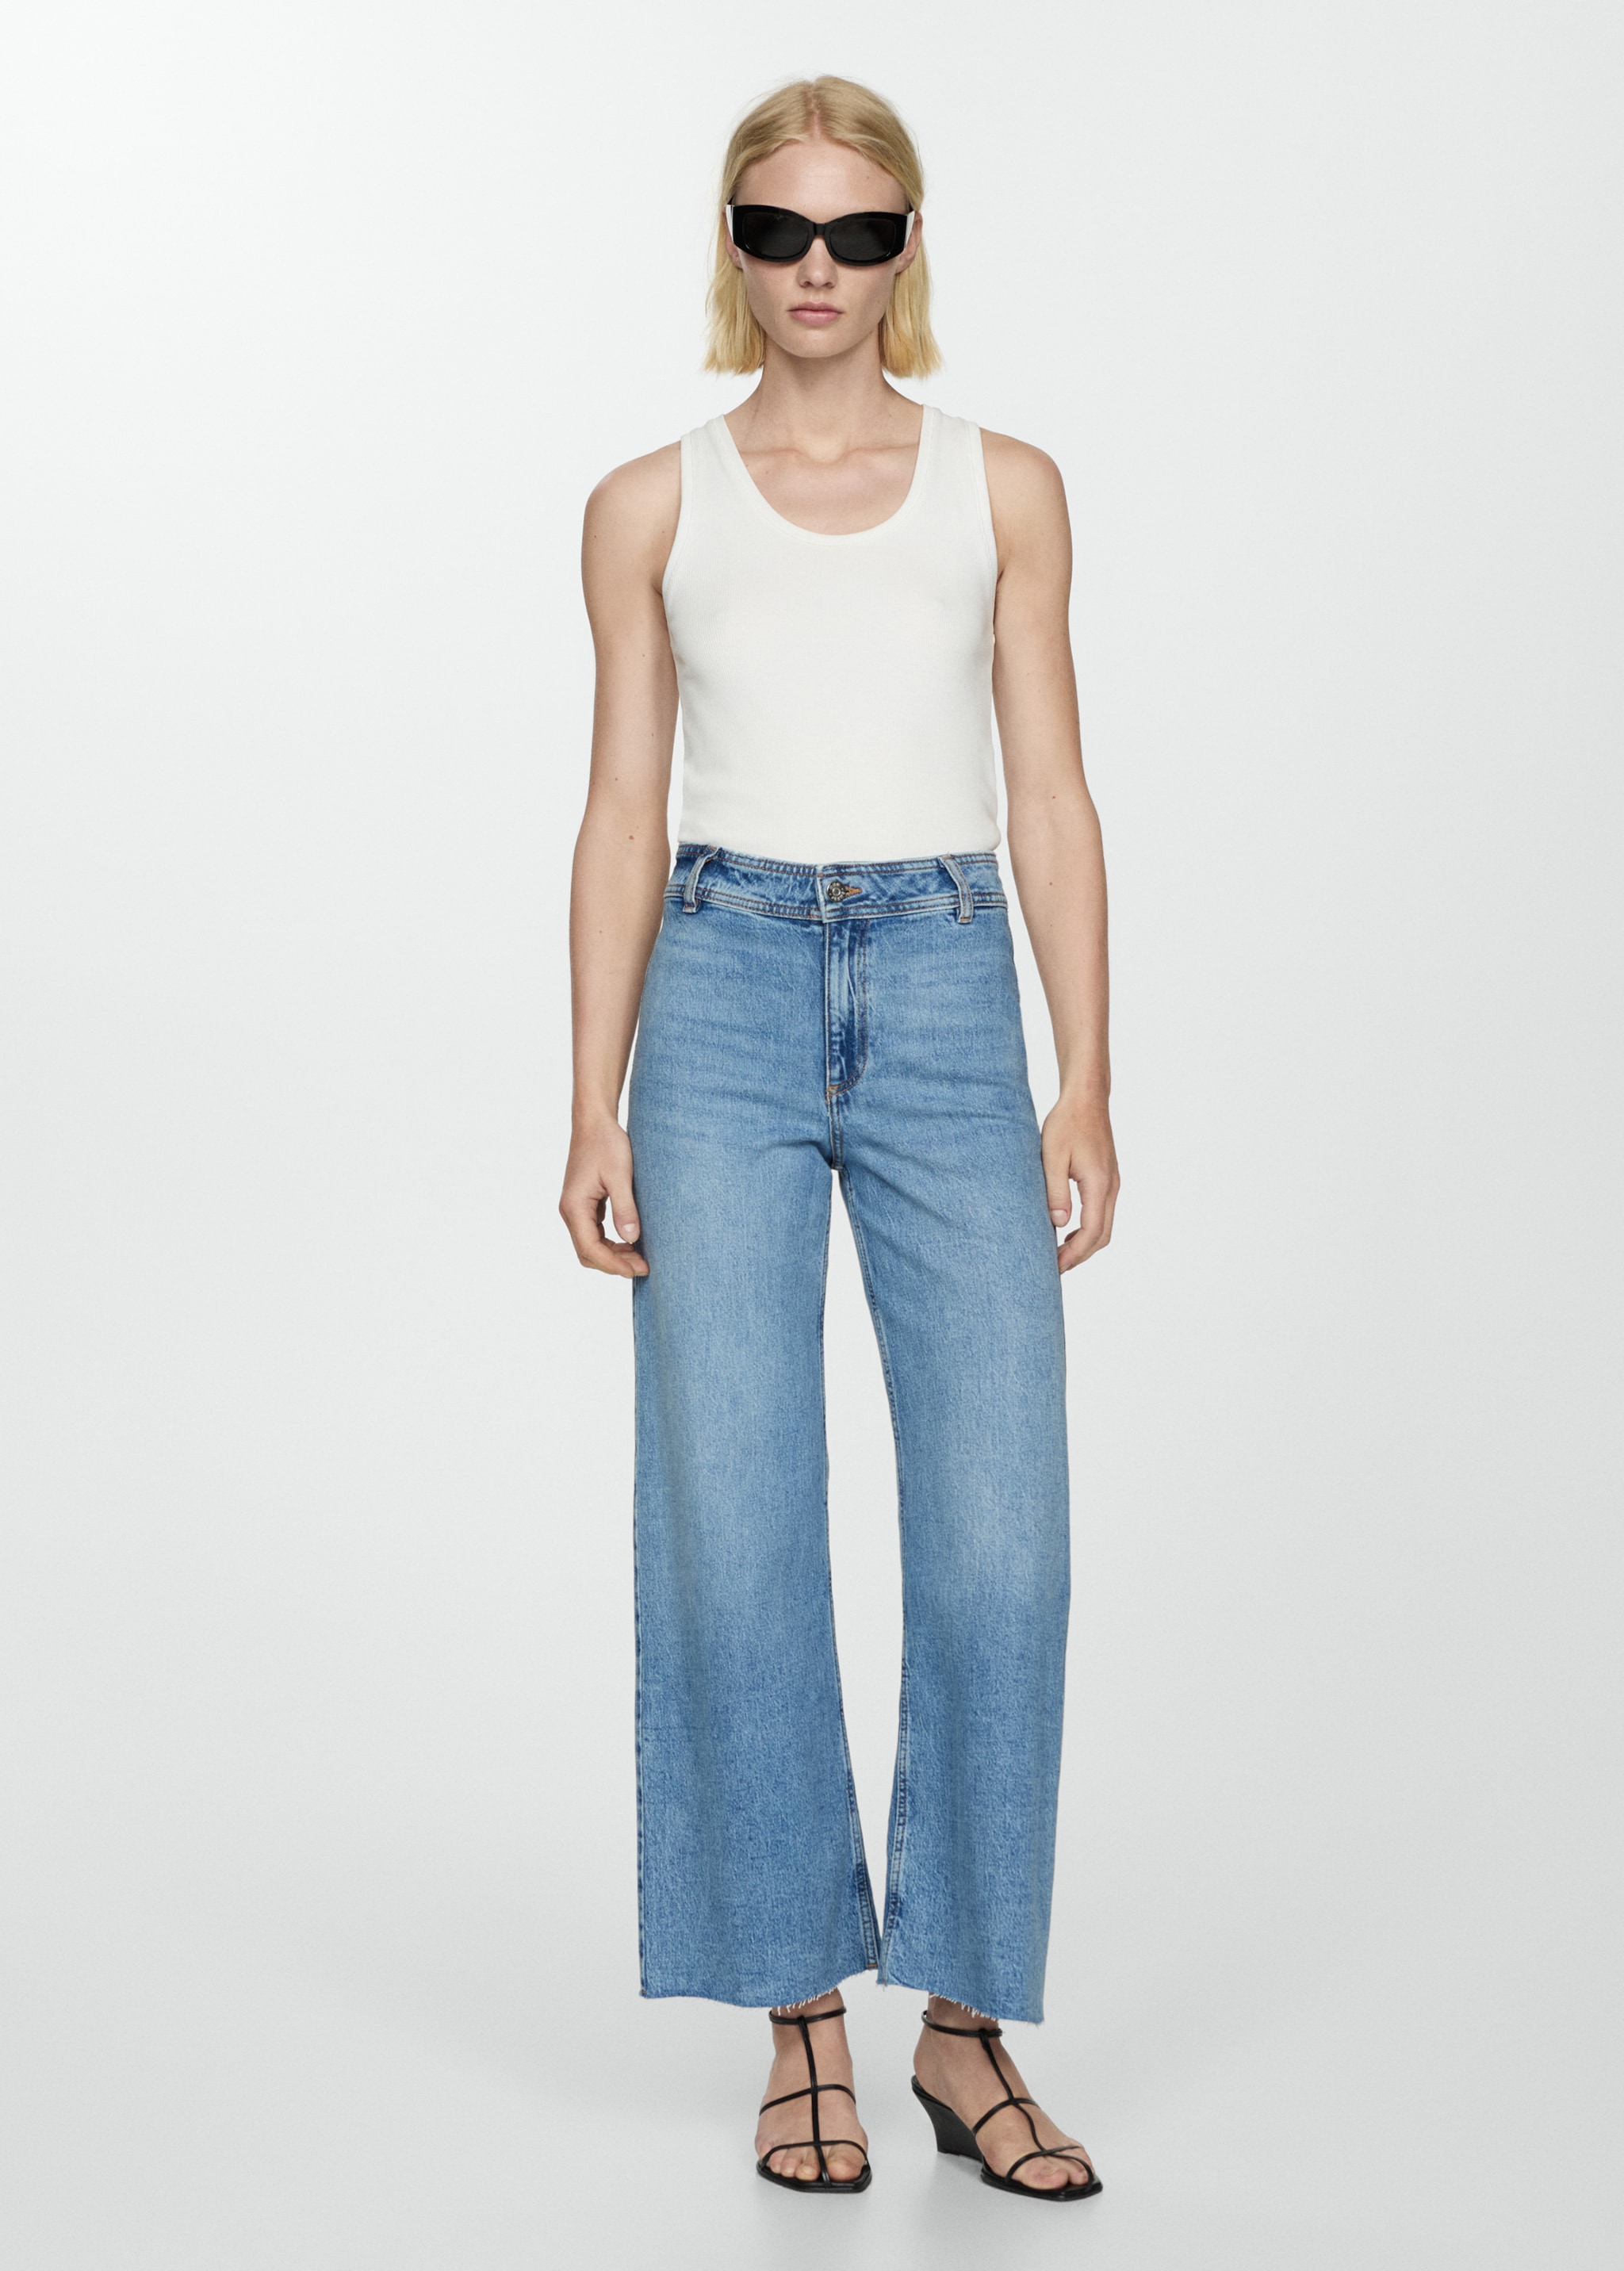 Catherin culotte high rise jeans - General plane